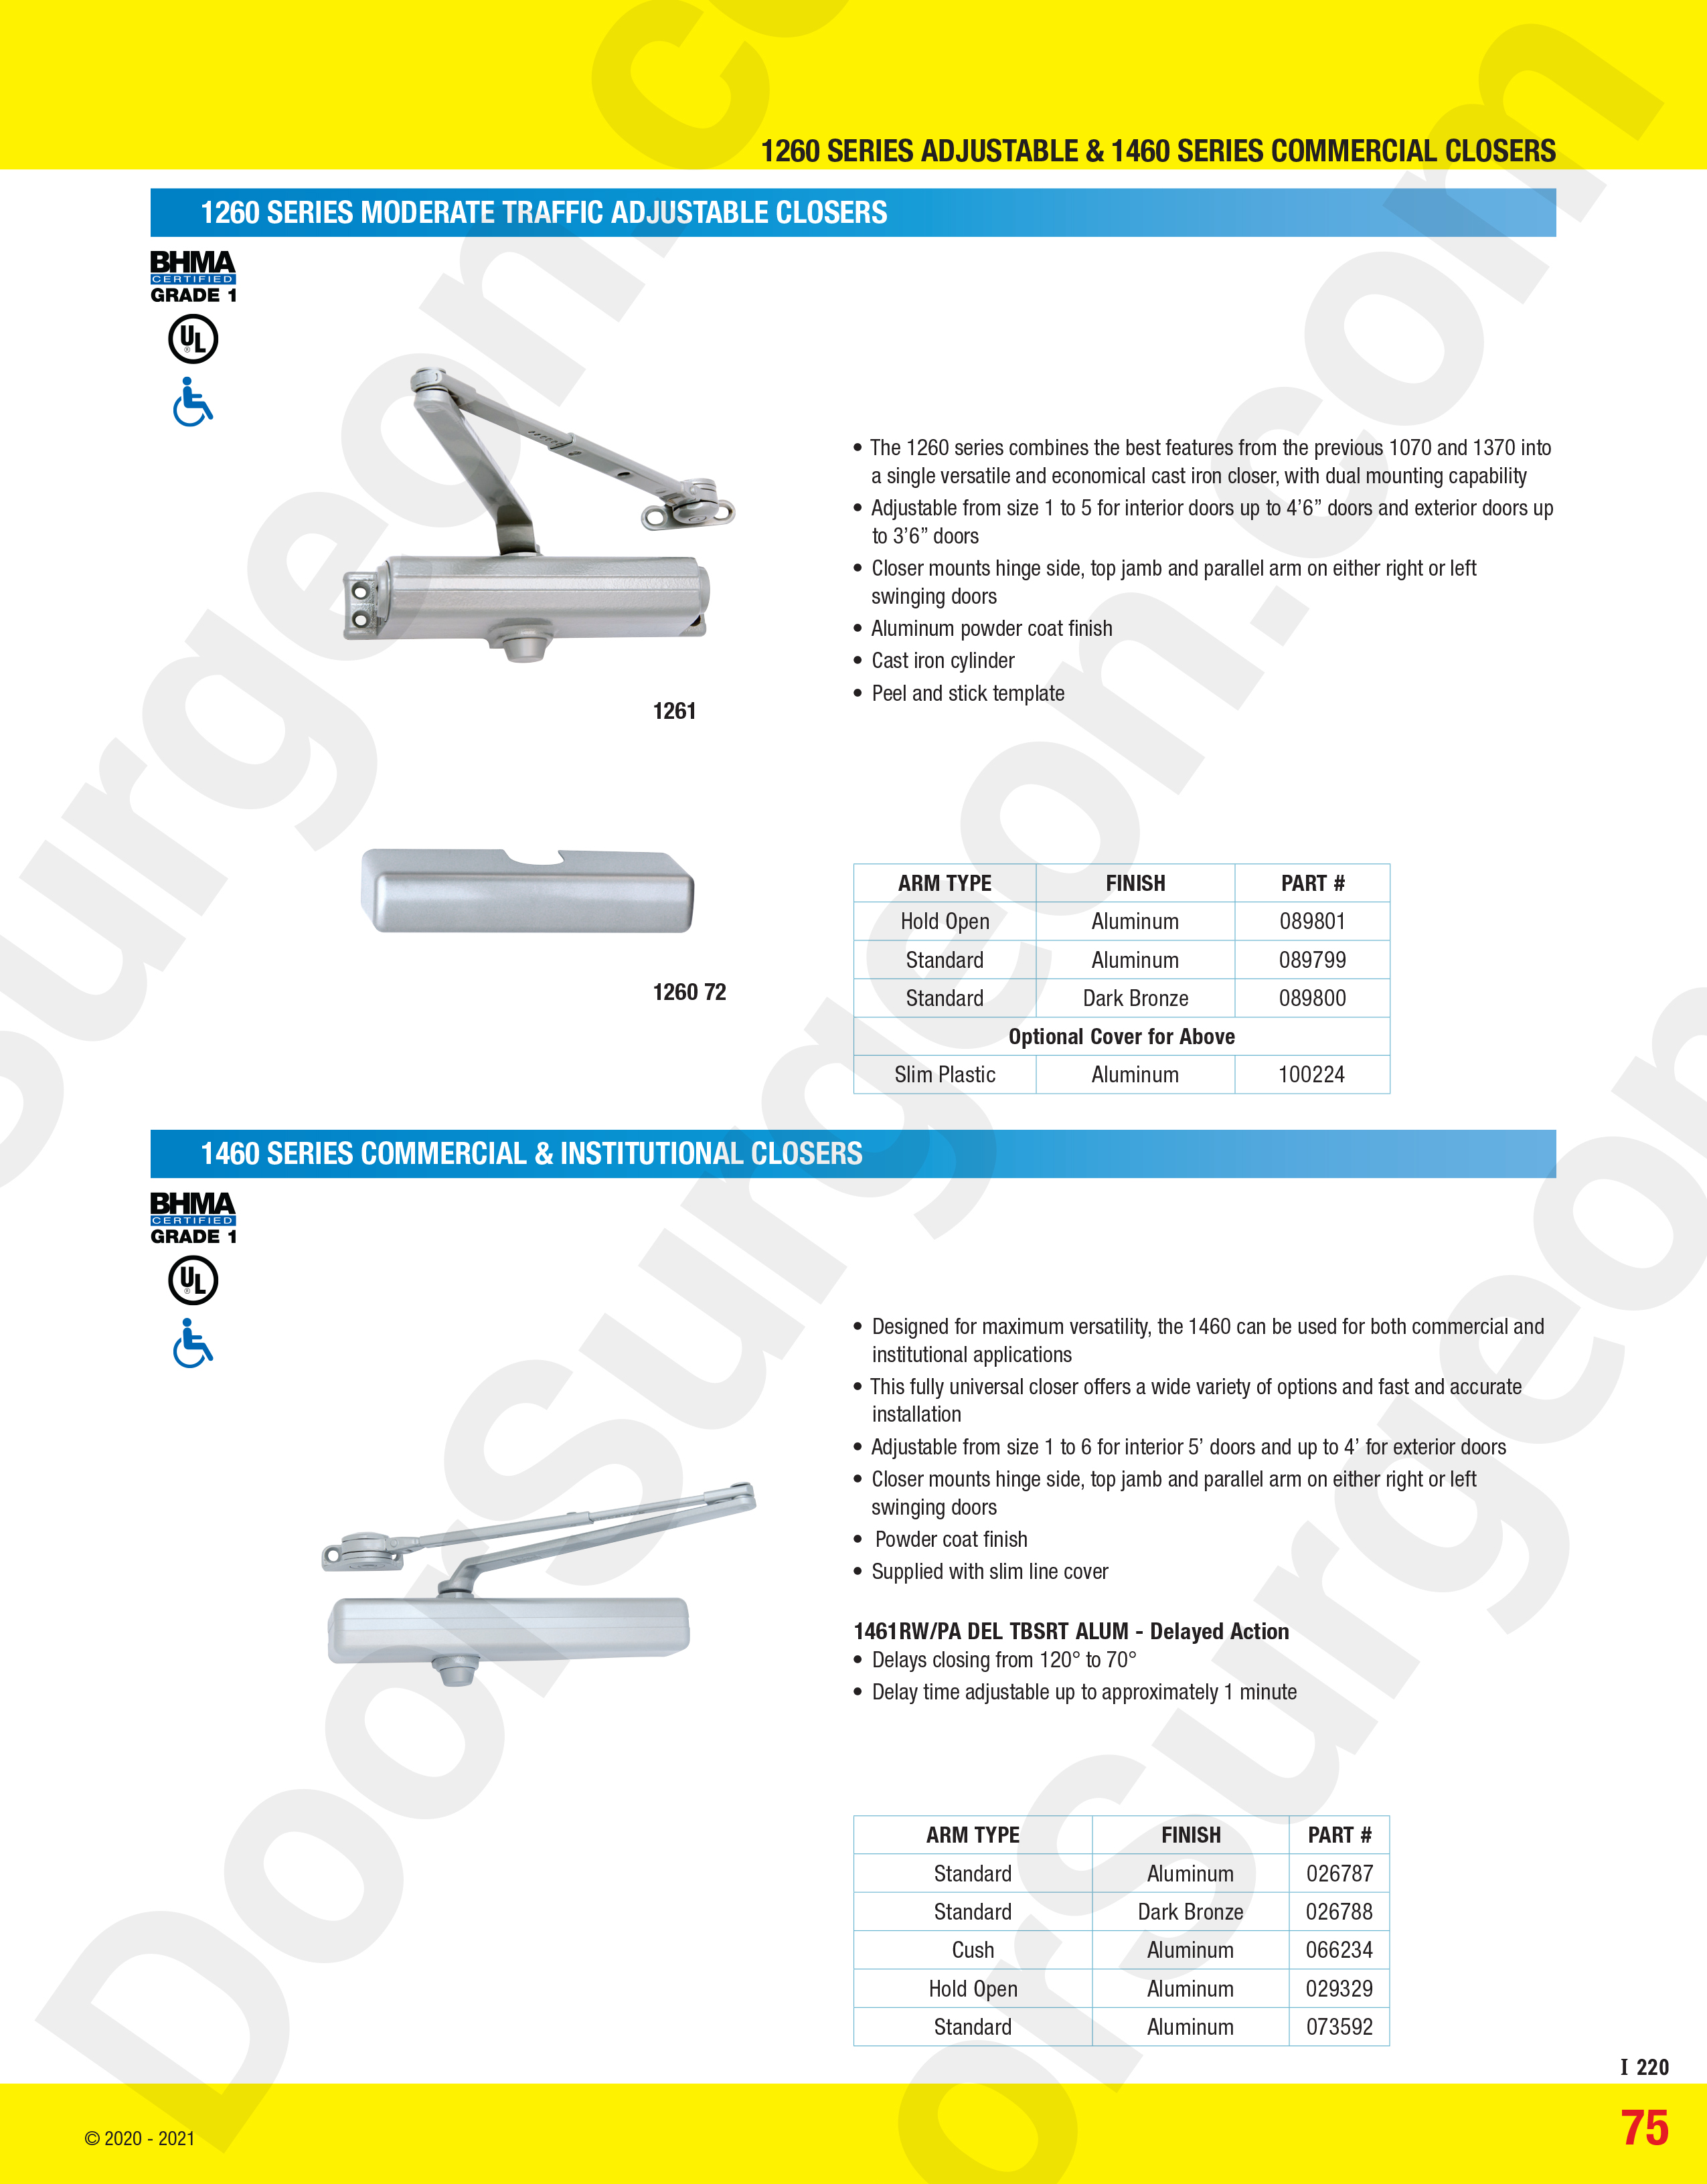 11260 Series moderate traffic adjustable closers and 1460 series commercial and institutional closers